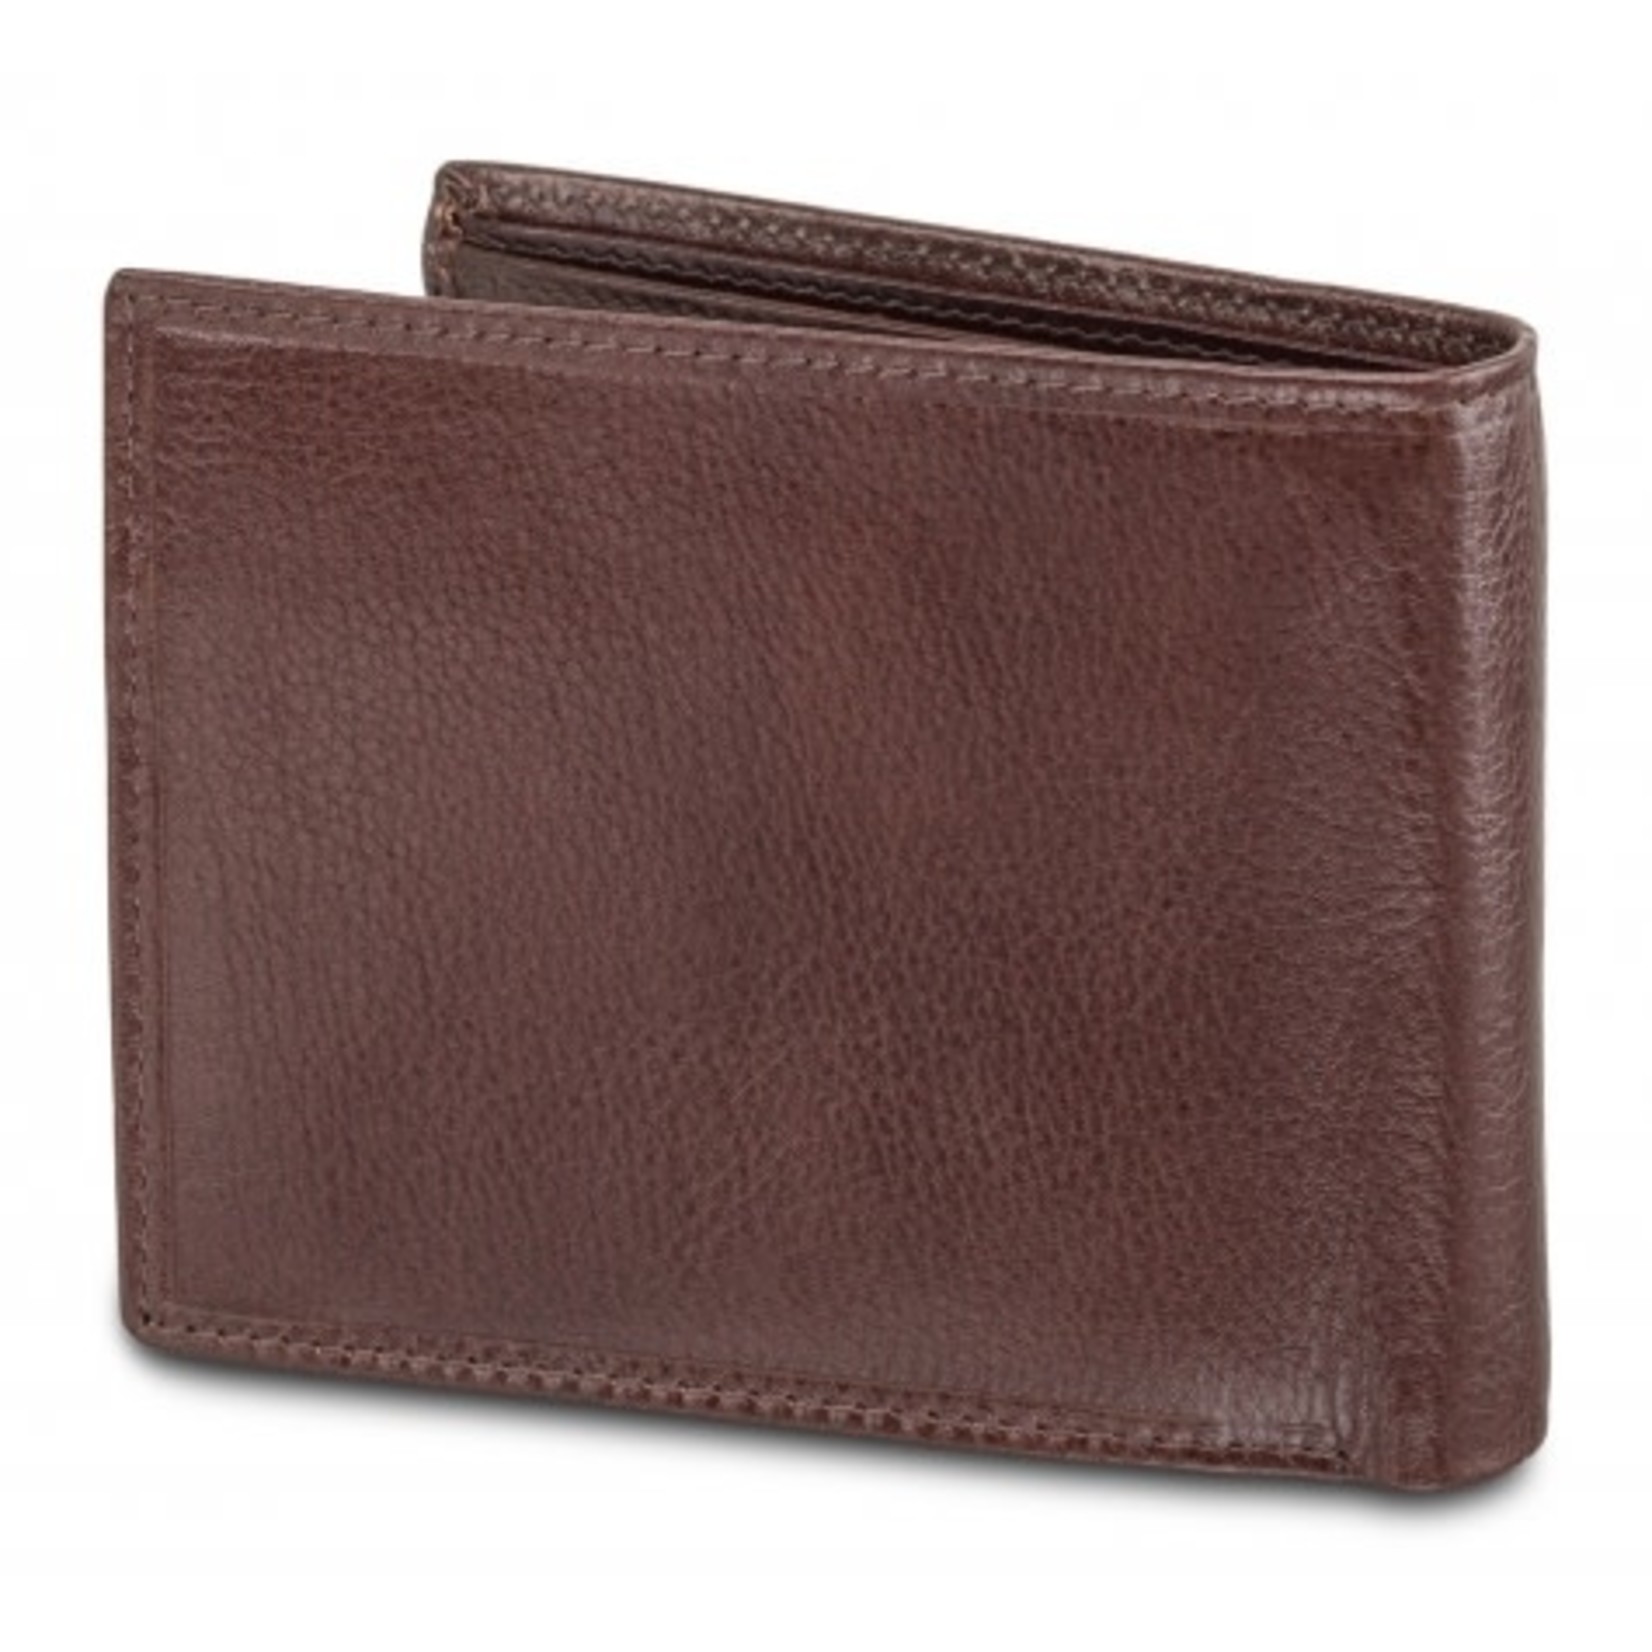 Mancini Men`s RFID Secure Wallet with Removable Passcase and Coin Pocket - Brown